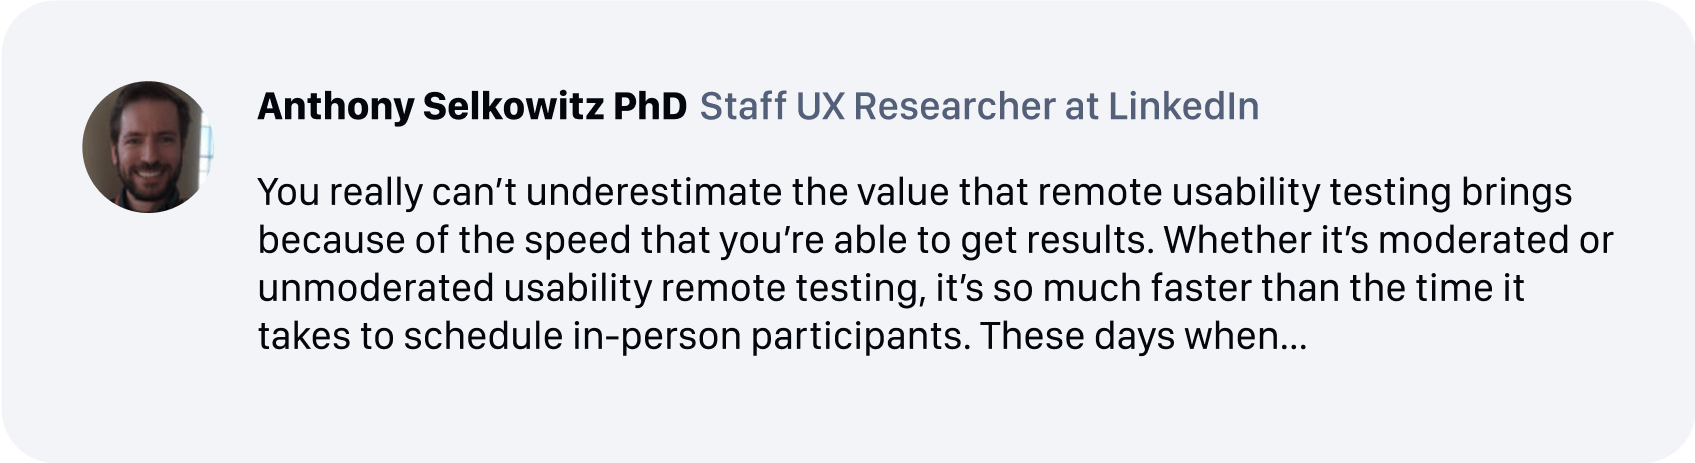 Anthony Selkowitz PhD, Staff UX Researcher at LinkedIn - You really can’t underestimate the value that remote usability testing brings because of the speed that you’re able to get results. Whether it’s moderated or unmoderated usability remote testing, it’s so much faster than the time it takes to schedule in-person participants. These days when...